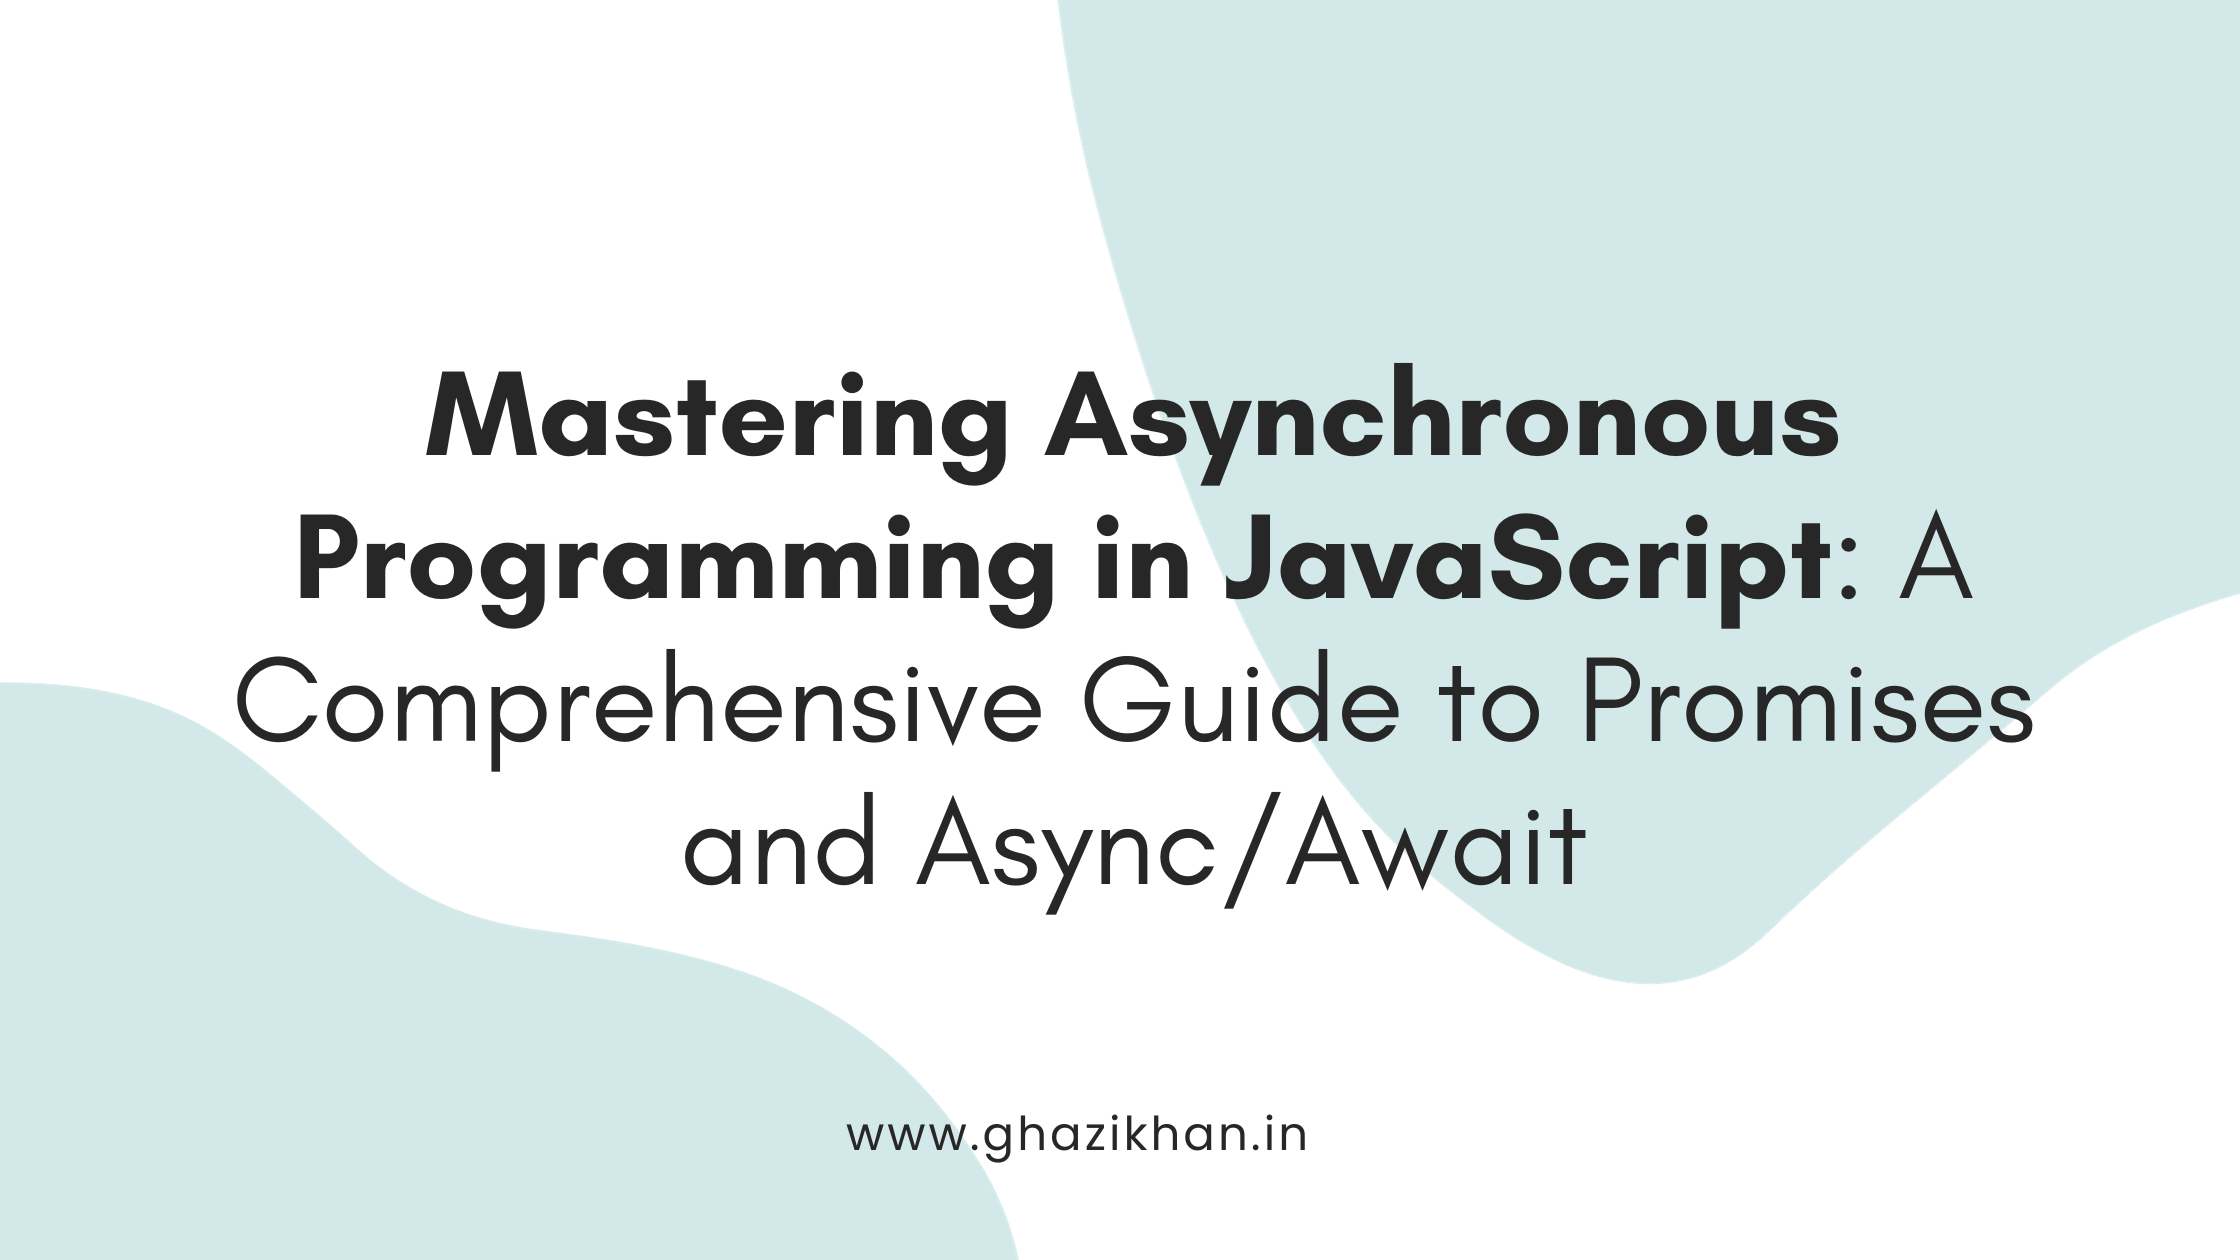 Mastering Asynchronous Programming in JavaScript: A Comprehensive Guide to Promises and Async/Await